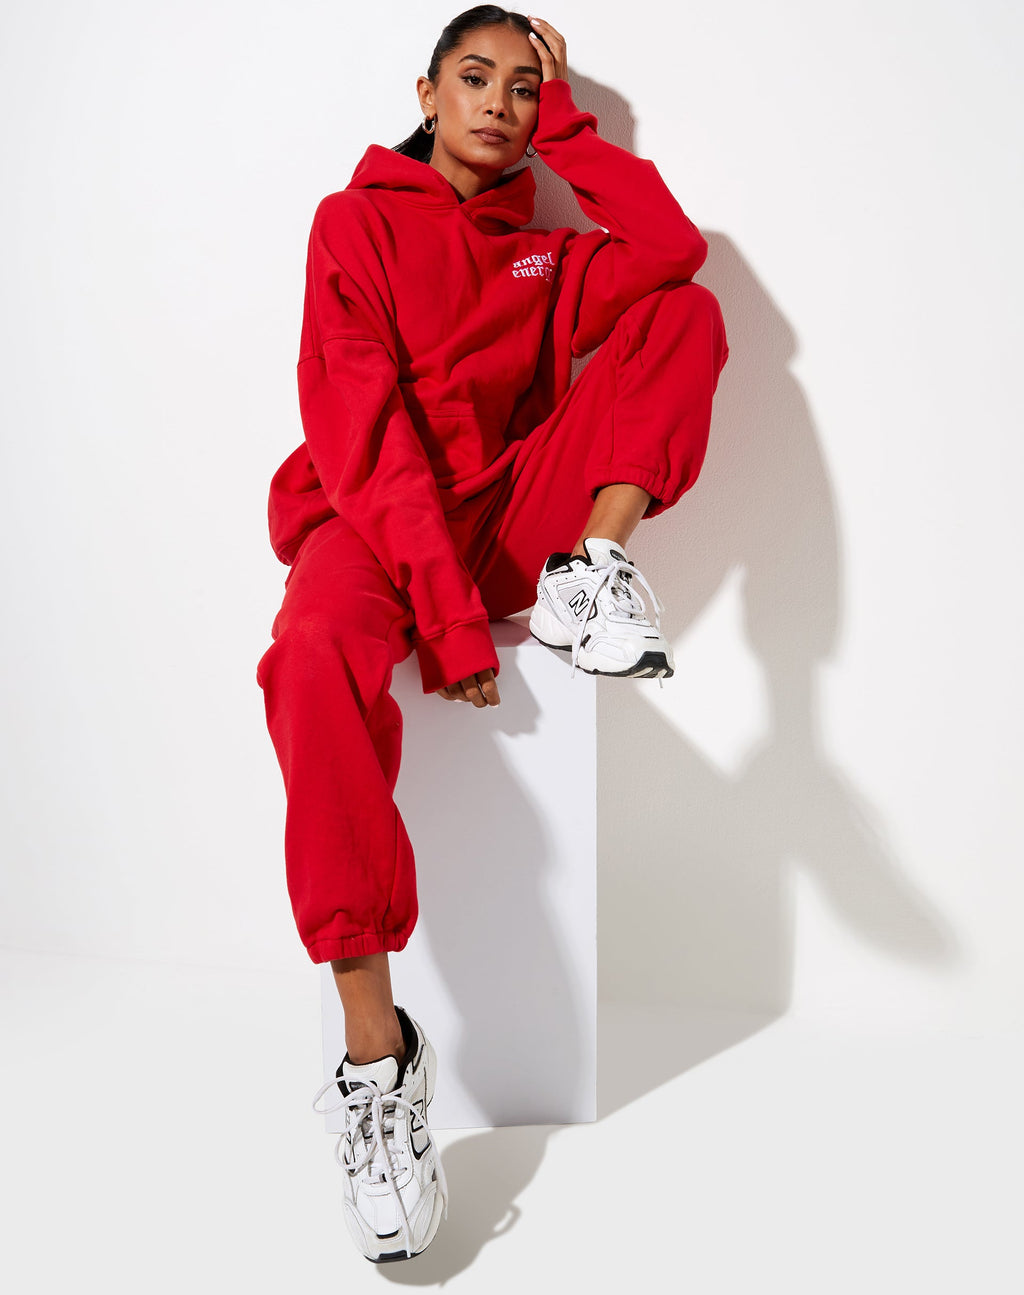 Oversize Hoodie in Racing Red with 'Angel Energy' Embro